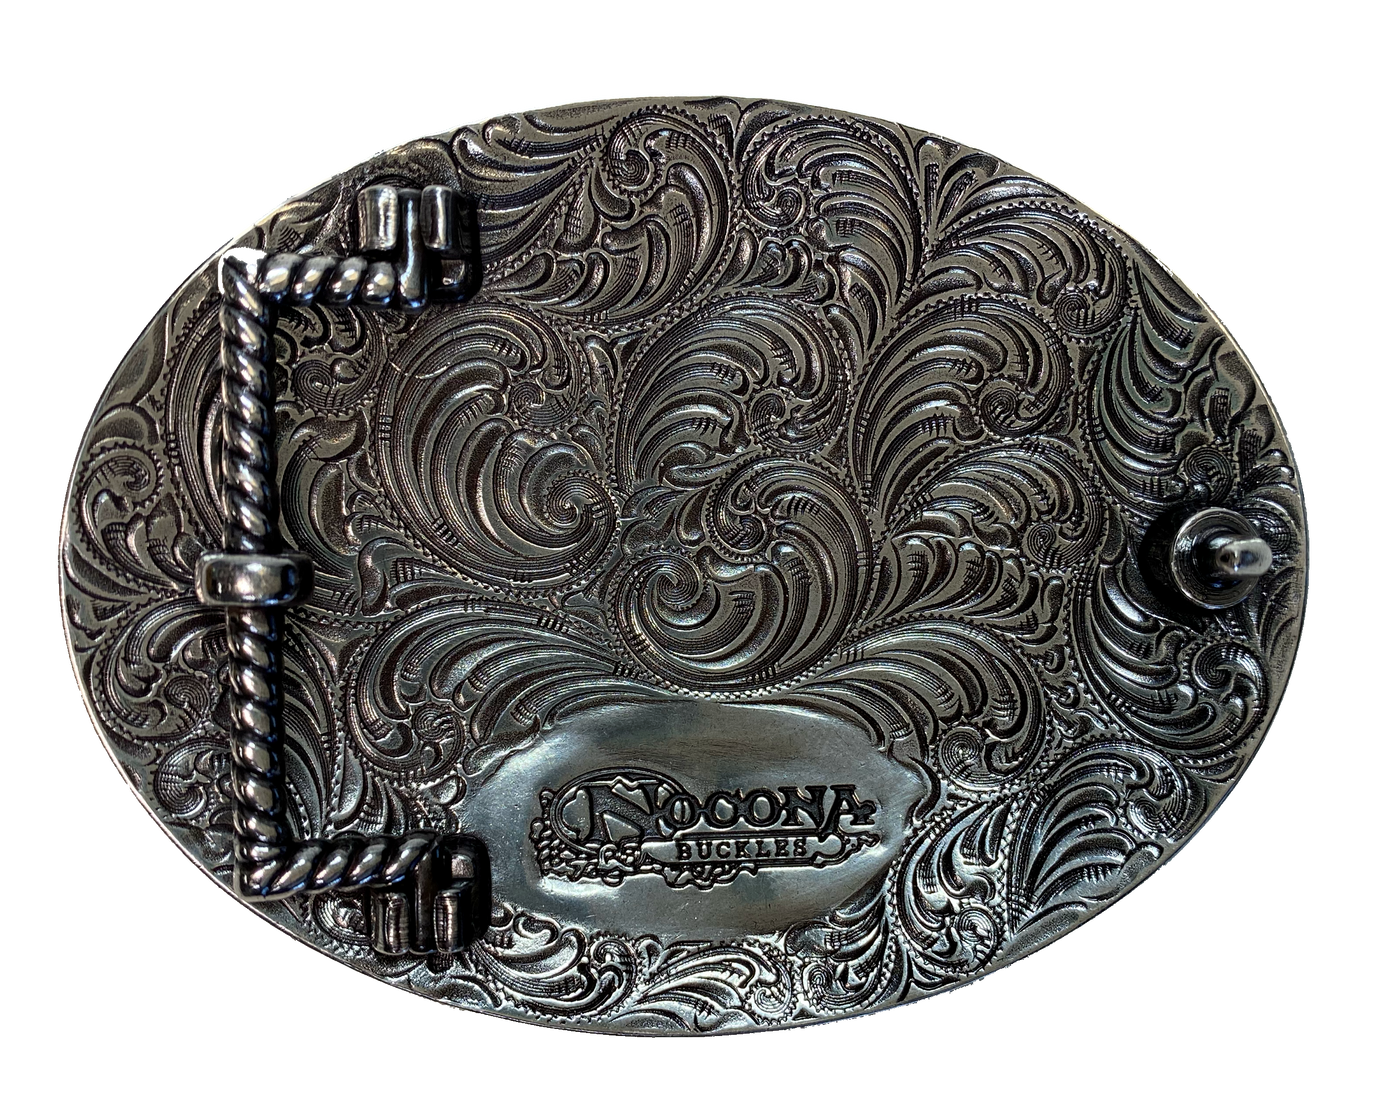 Antique silver with Black stars with a ornate western scroll in the background. Oval shape is good for most body types without digging in to your mid section. Fits up to 1  1/2" belts. Dimensions are approx. 3 1/4" tall x 4 1/4"wide.